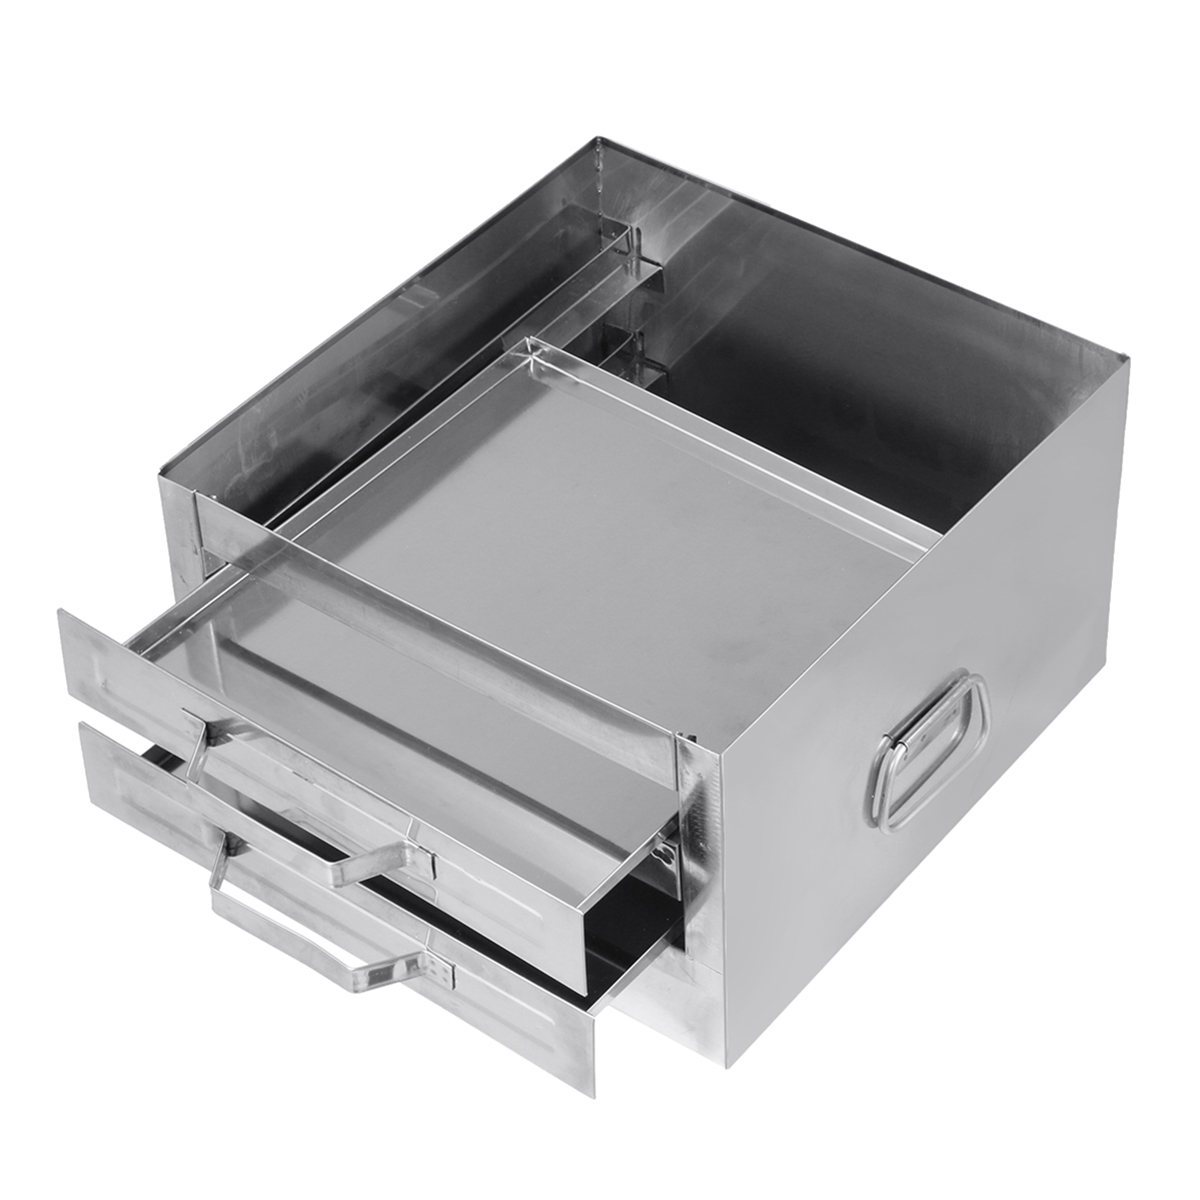 Stainless-Steel-Tray-2-Layer-Steamed-Vermicelli-Rice-Roll-Machine-Kitchen-Cooking-Steamer-Drawer-1339662